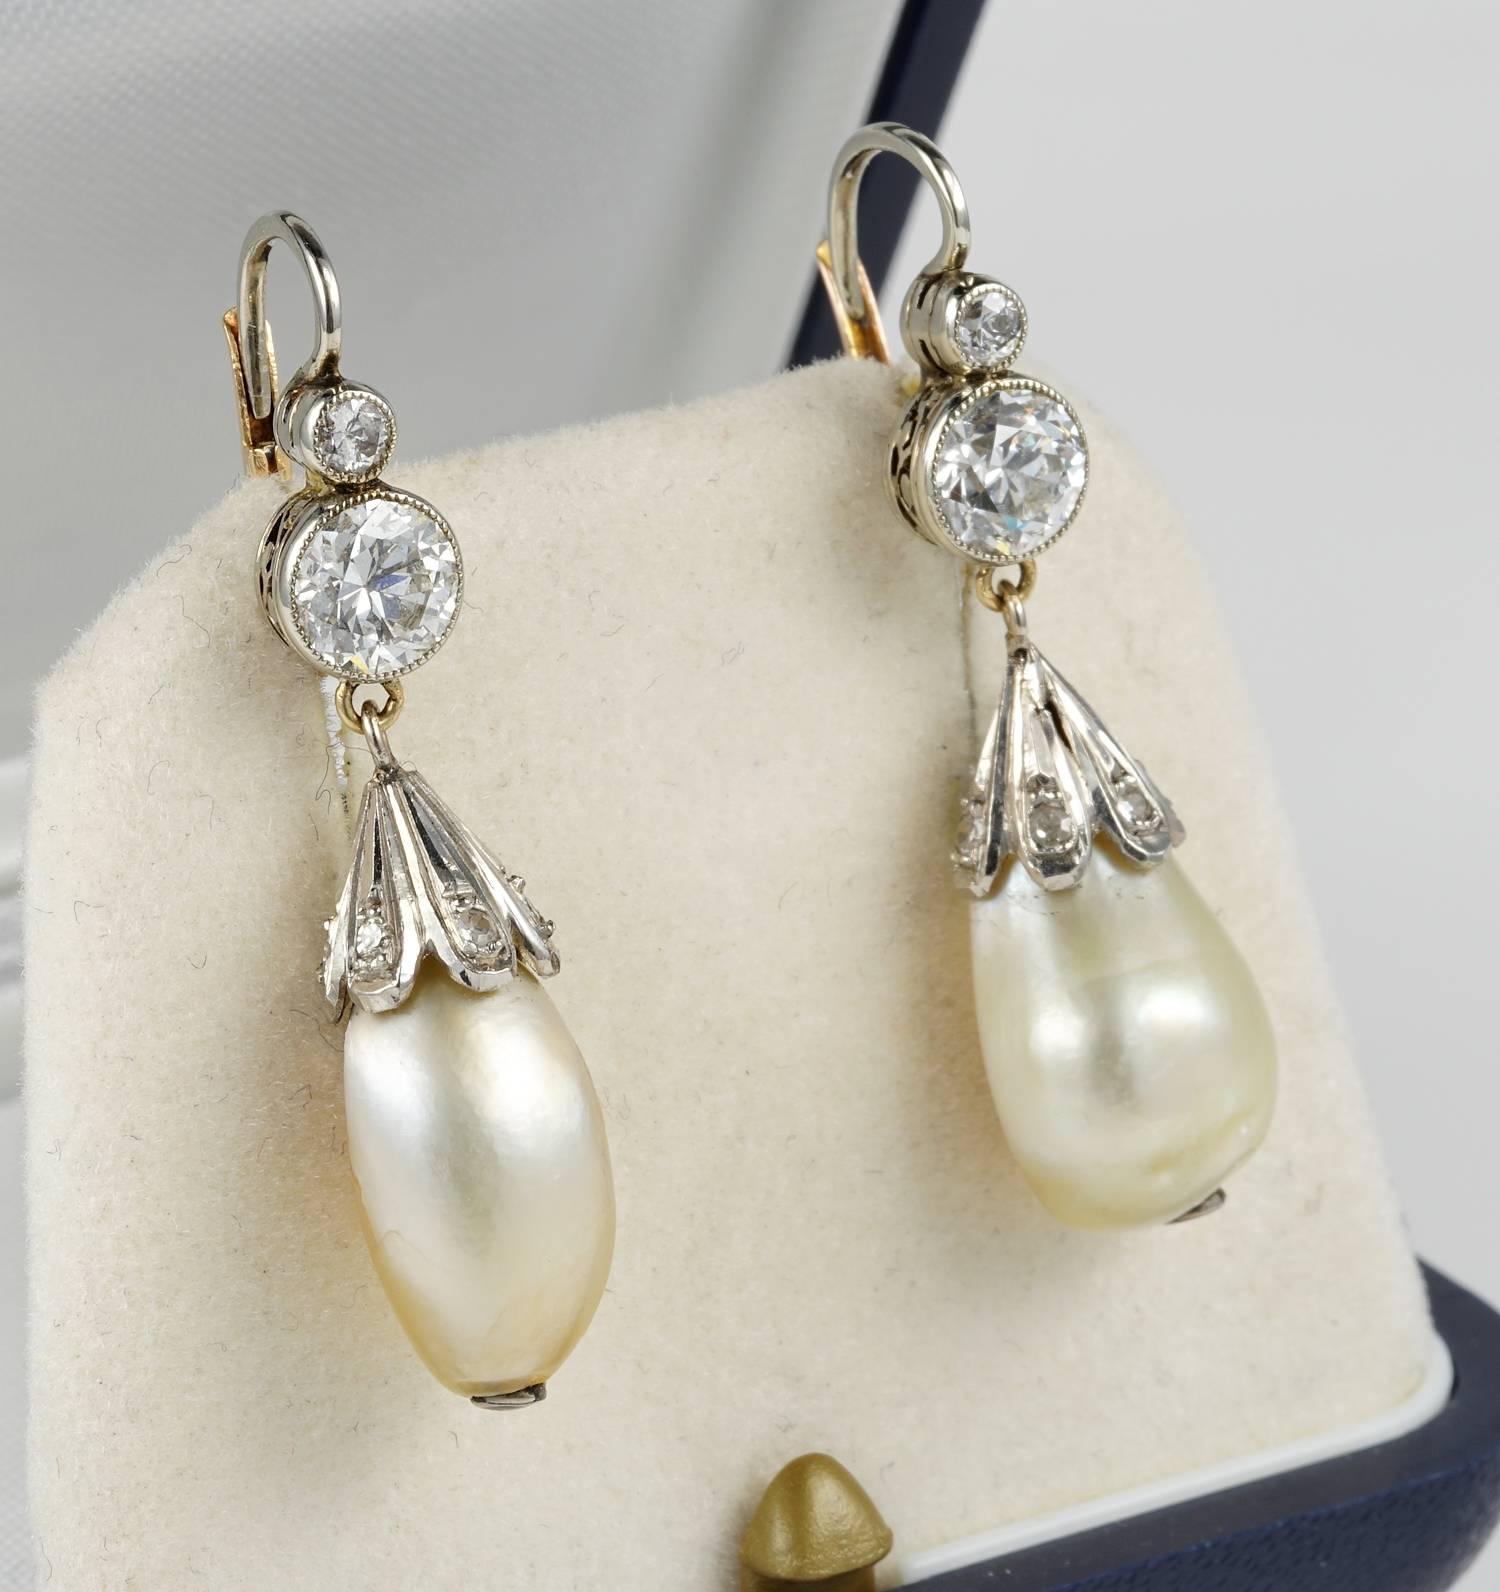 Exquisite in a word, rare pair of Belle Epoque period natural salt water pearl and Diamond teardrop earrings
Natural pearls were so much beloved by the Edwardians, here is a stunning pair from the period
Crafted in Platinum, marked
Certified natural